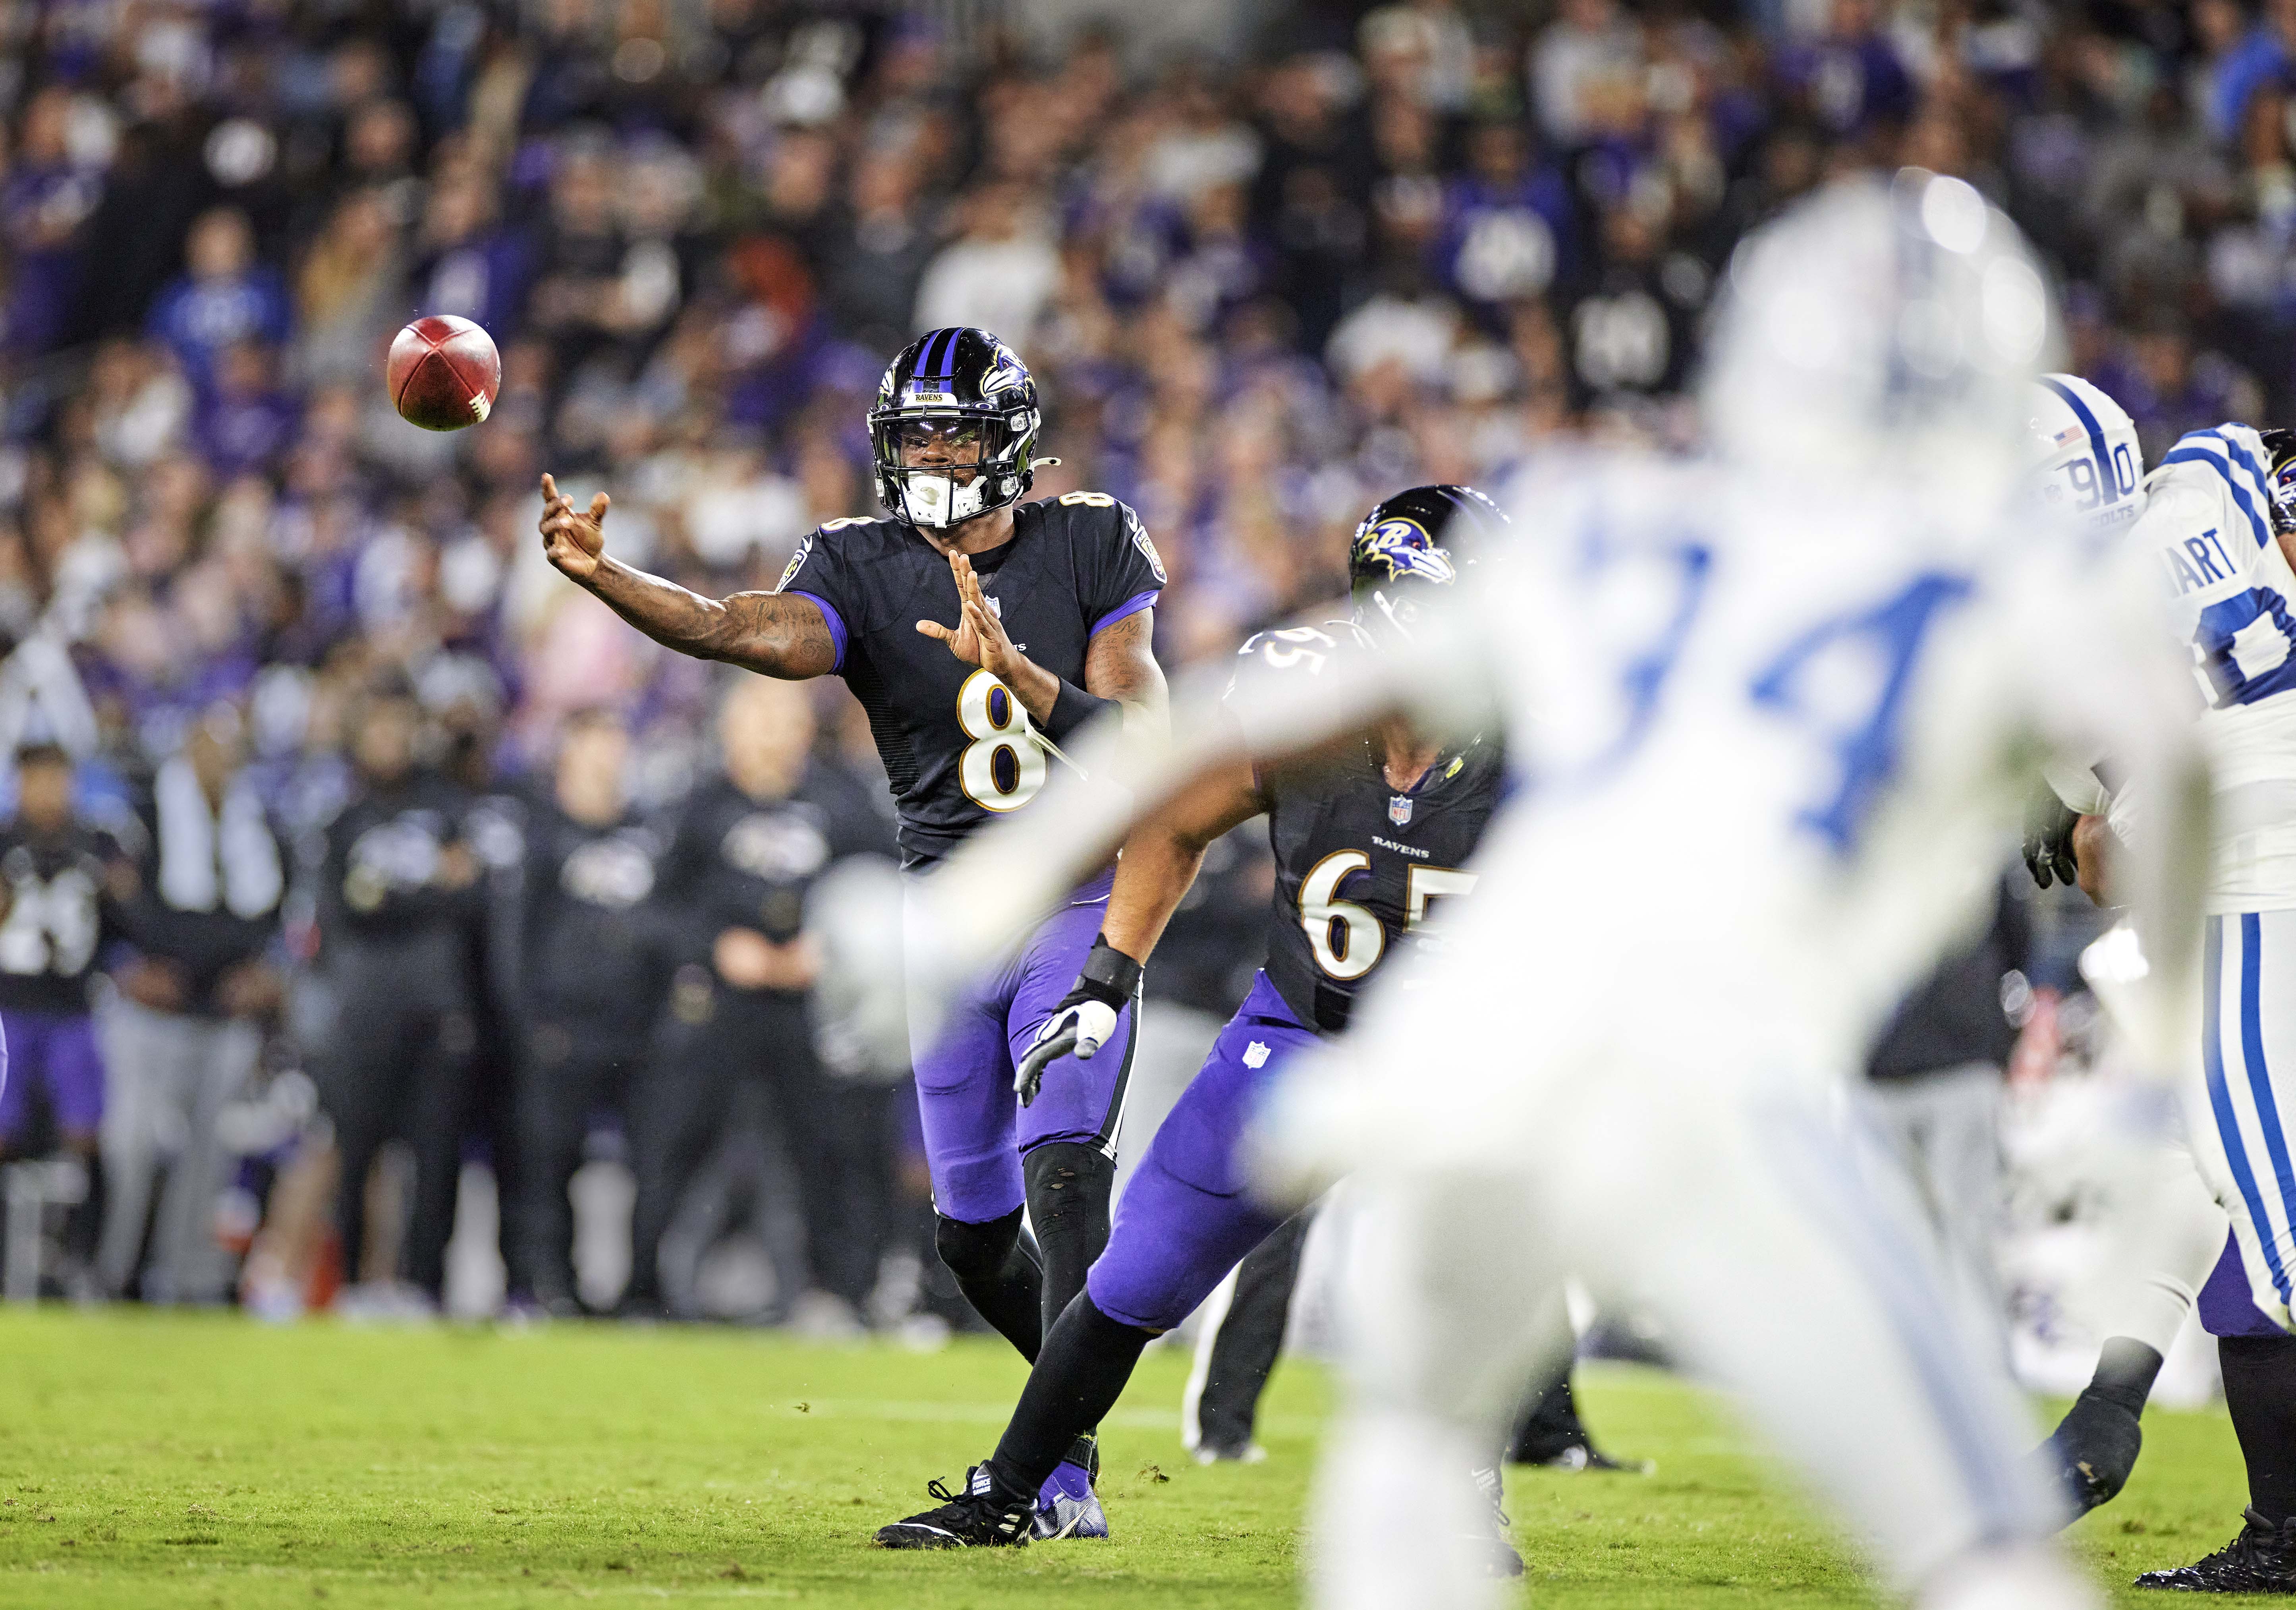 Lamar Jackson throws a sidearm pass during a game against the Colts